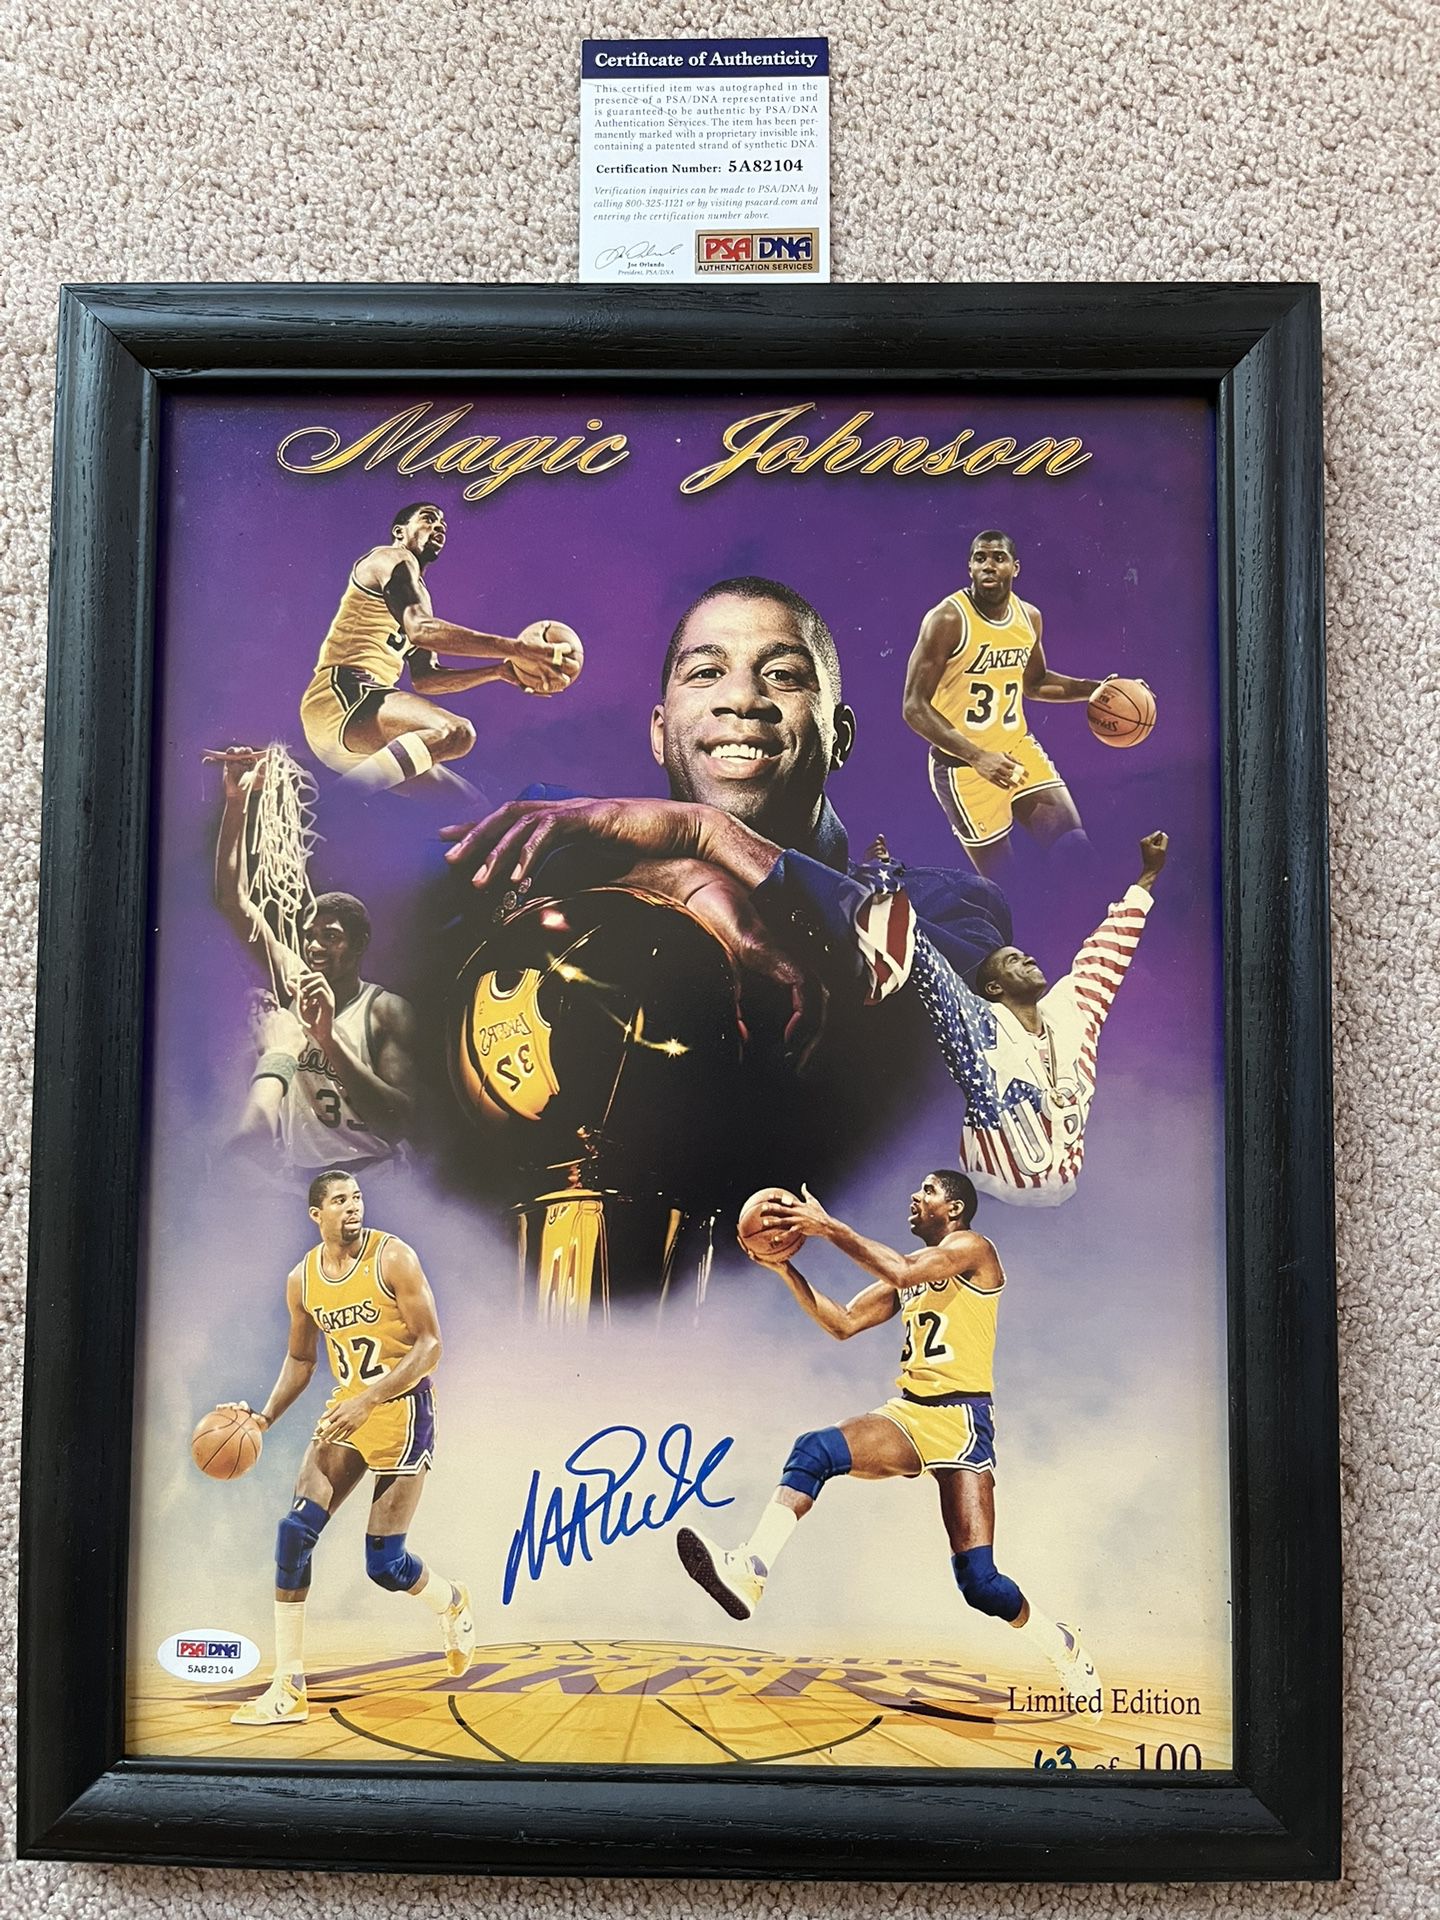 Magic Johnson Framed Autographed Photo Limited Edition 63 of 100 PSA DNA Authentic Signature Signed